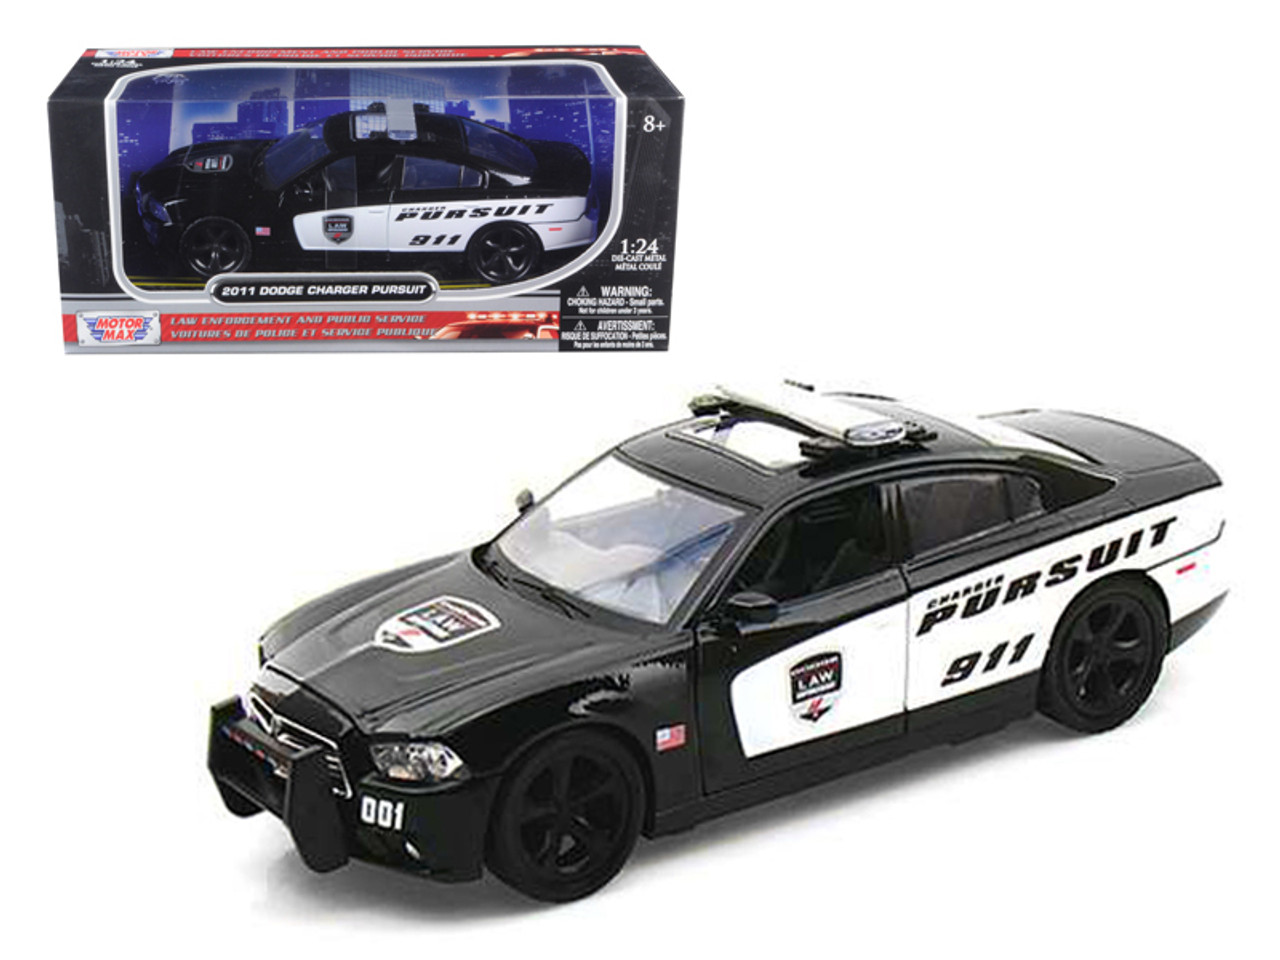 2011 dodge charger police